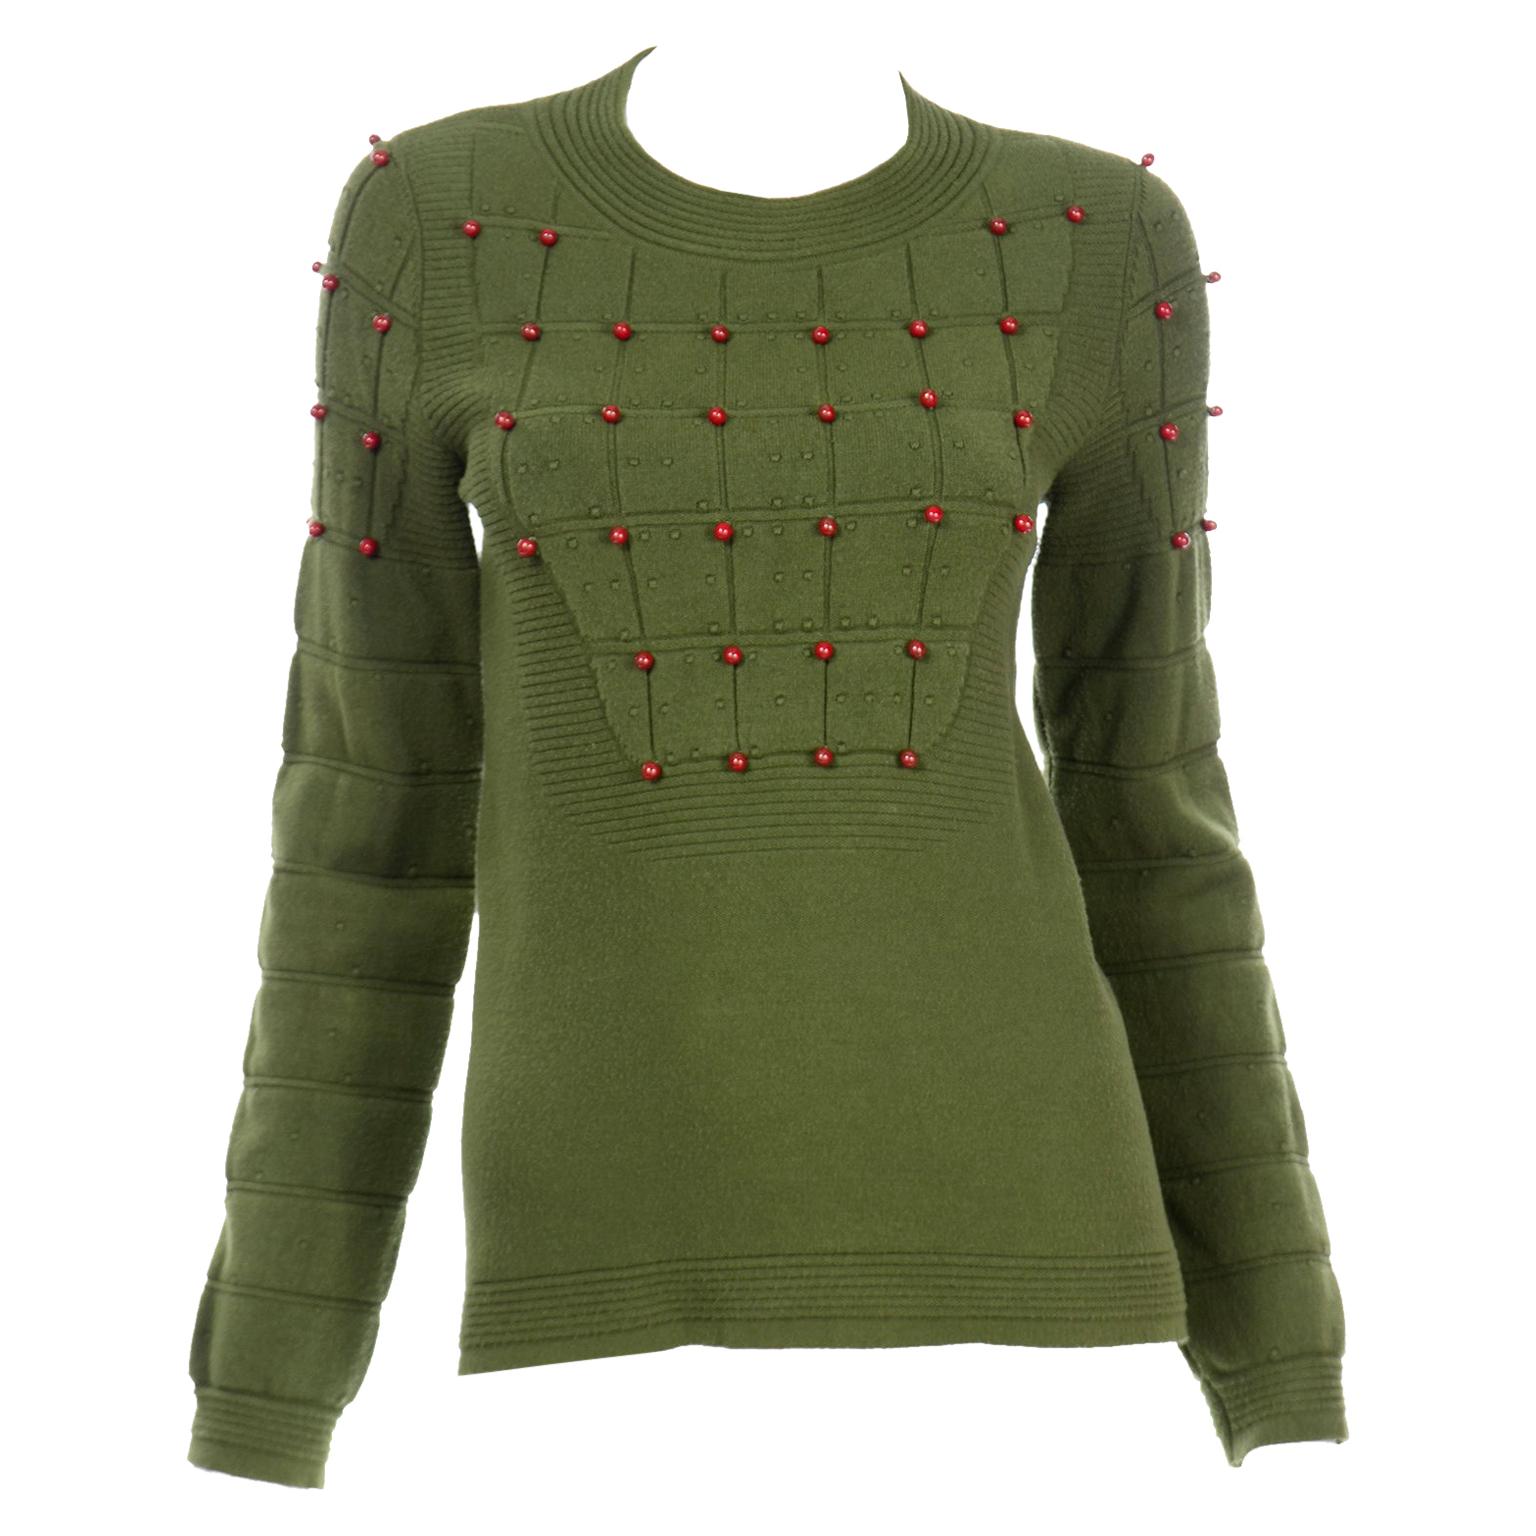 Chanel Cashmere Blend Textured Beaded Green Pullover 2010 Runway Sweater 